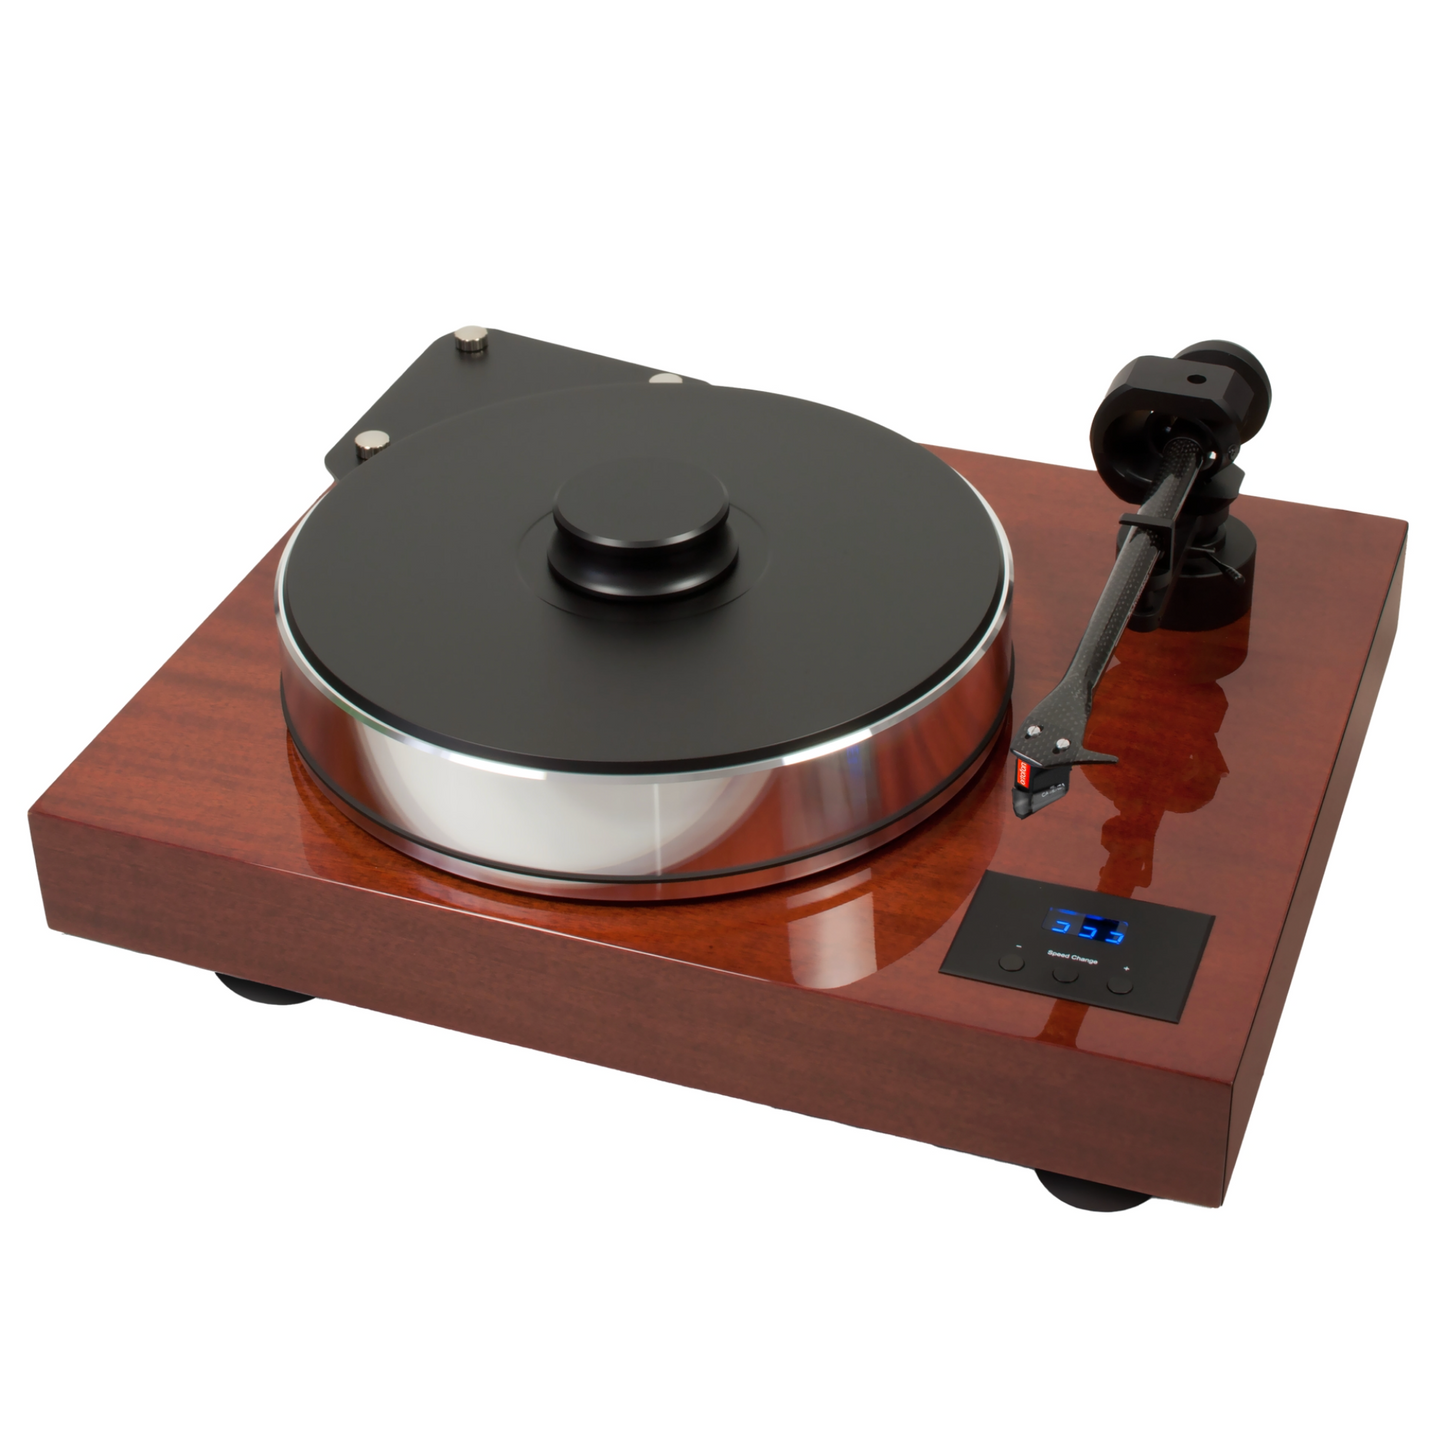 ProJect AudiProJect Xtension 10 Evolution Turntable in Mahogany